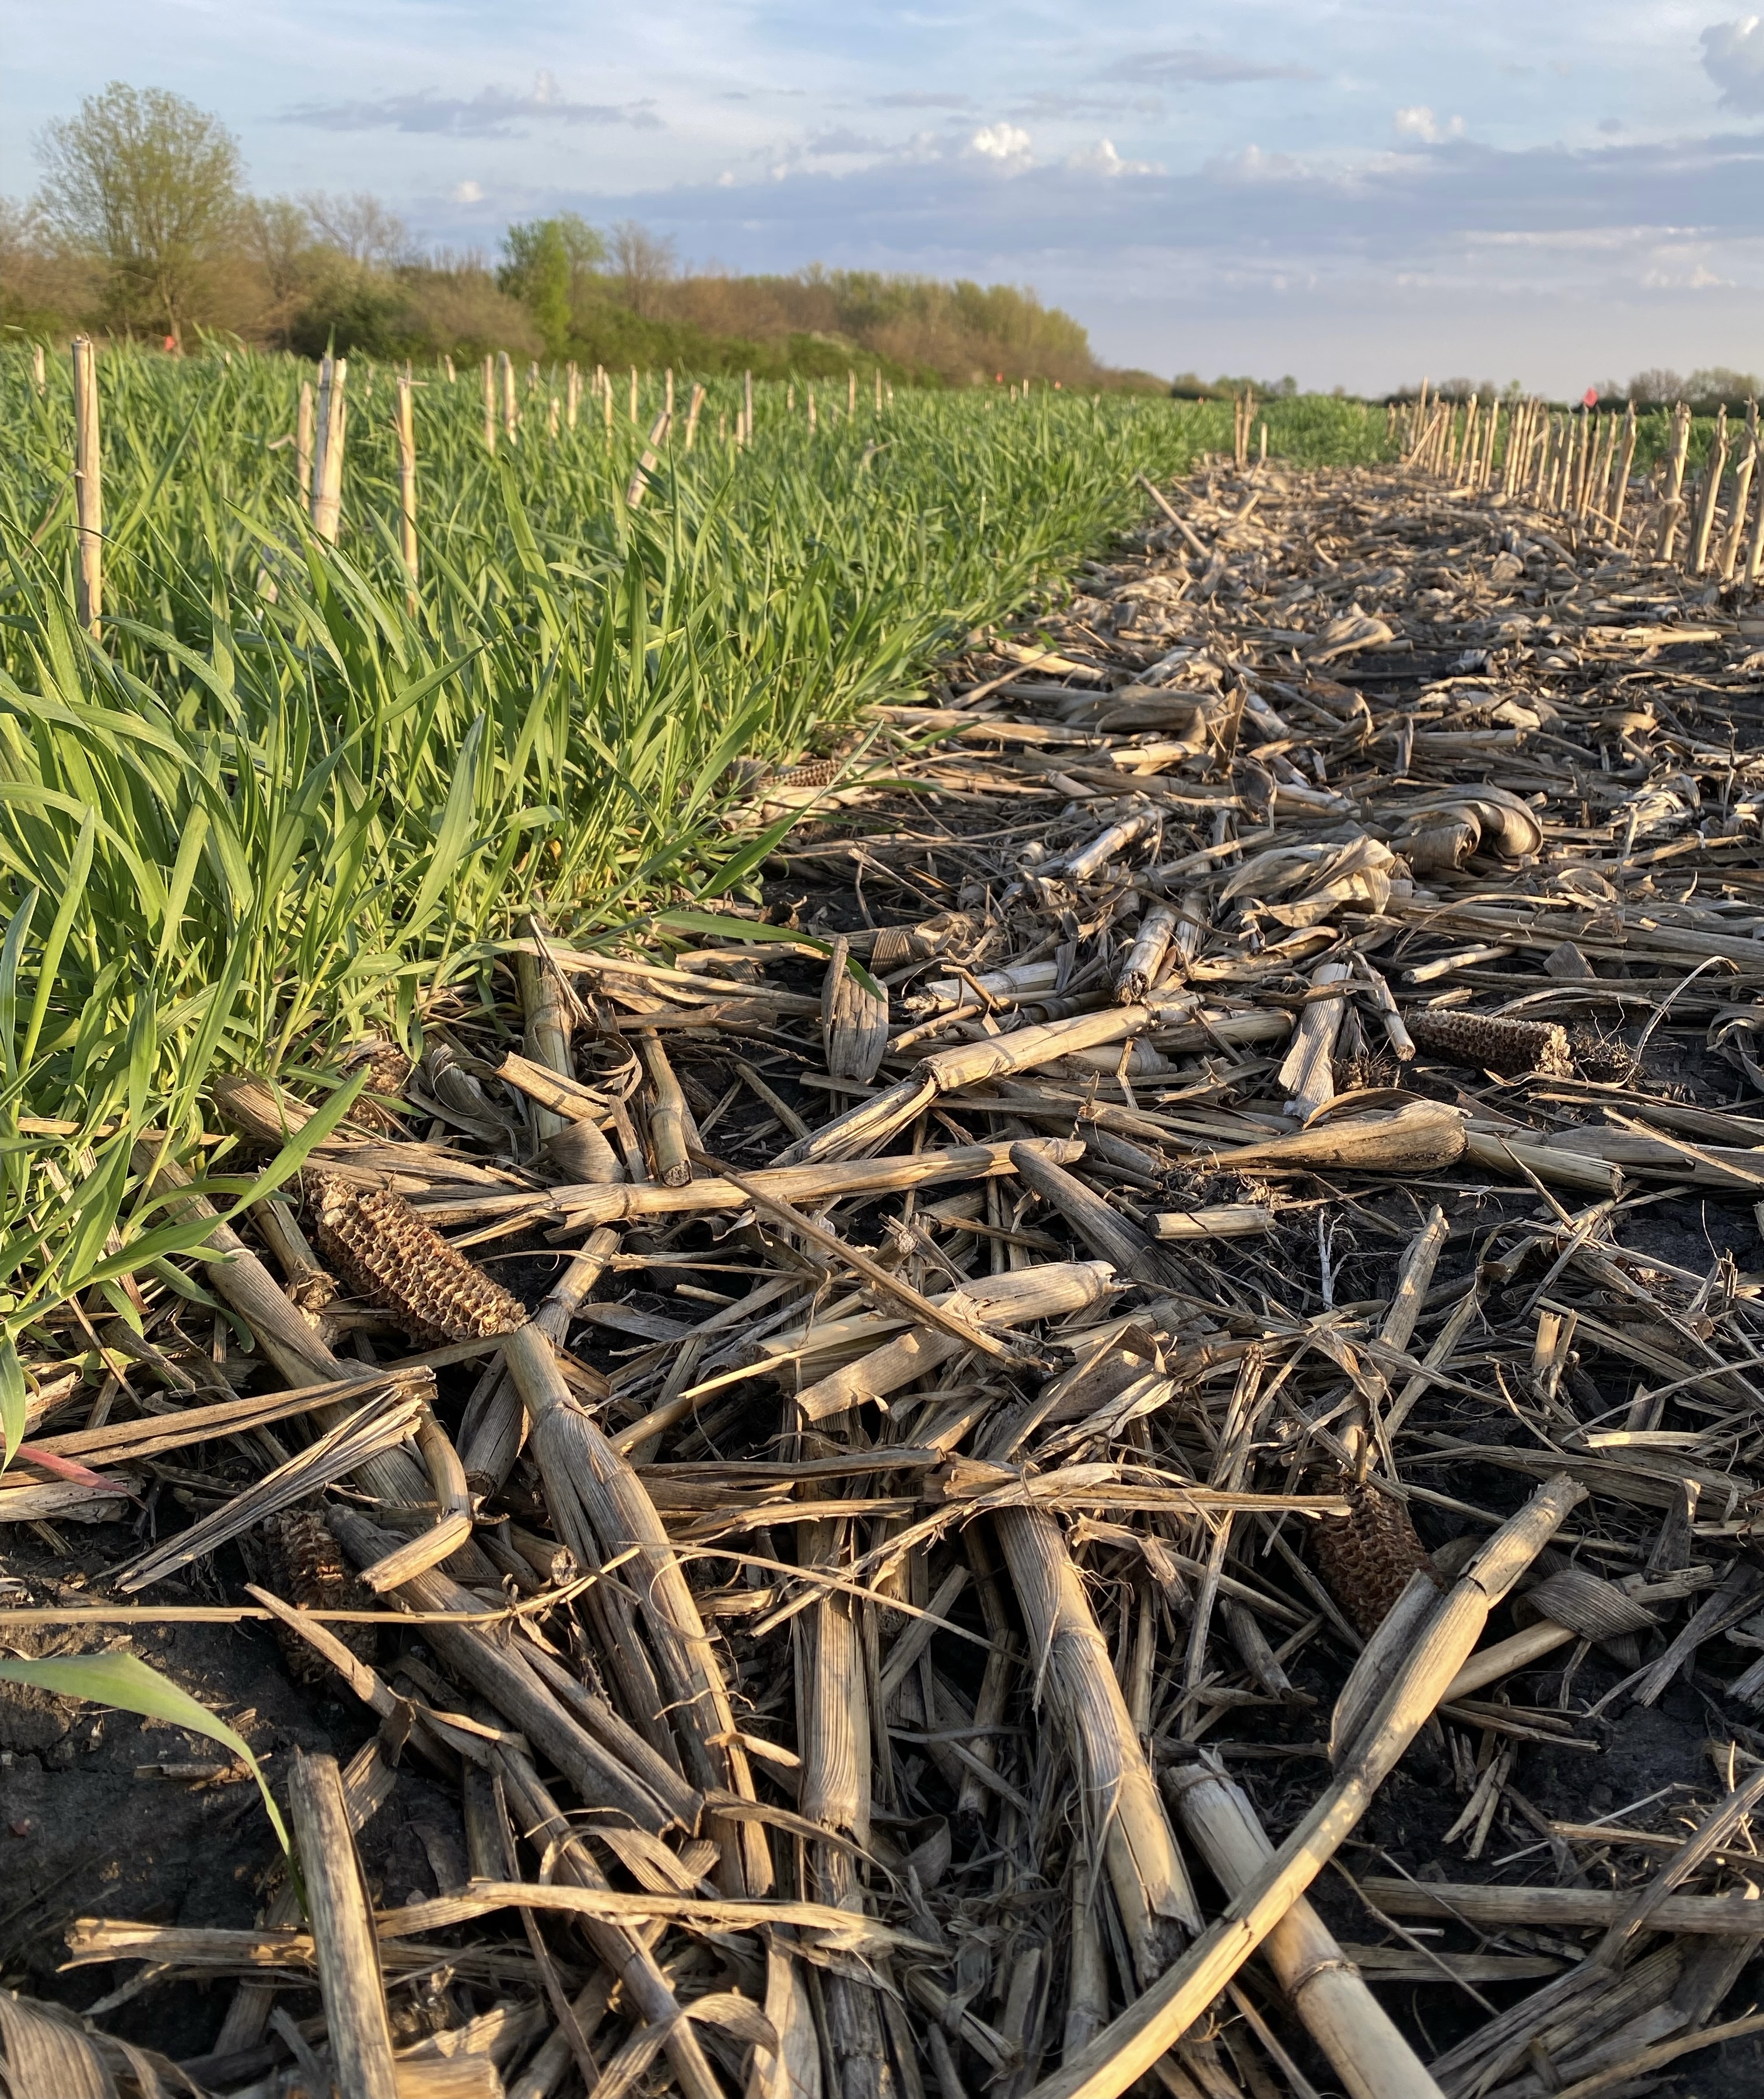 A cereal cover crop planted into corn residue for research into the benefits of biodigesters in crop residue management. Photo courtesy of UIUC Crop Physiology Lab.